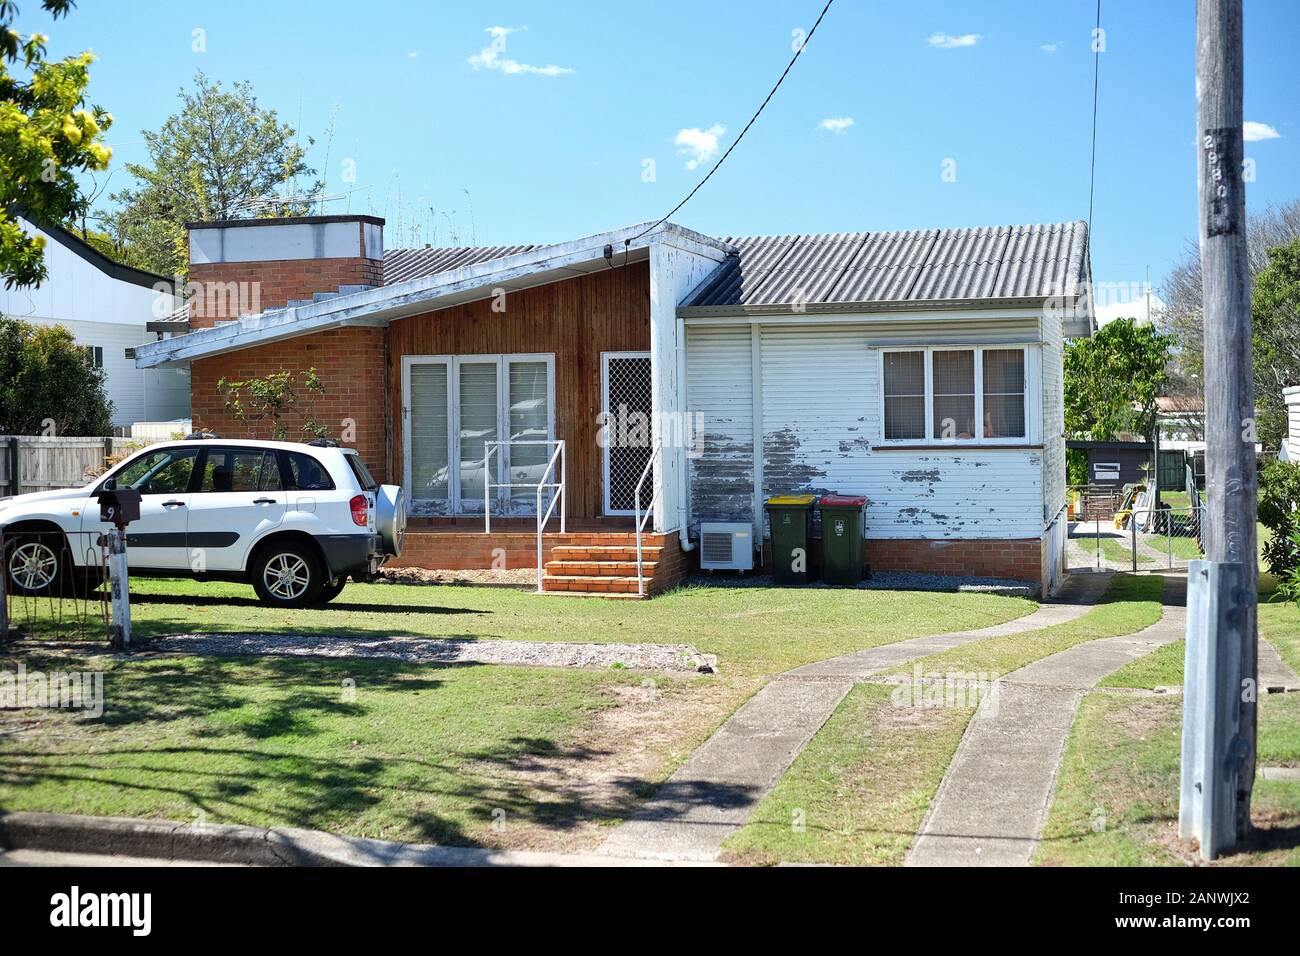 Post War House in the Brisbane suburbs of Carina, with fibro roof, their topography and modern 'new queenslander' equivalents Stock Photo